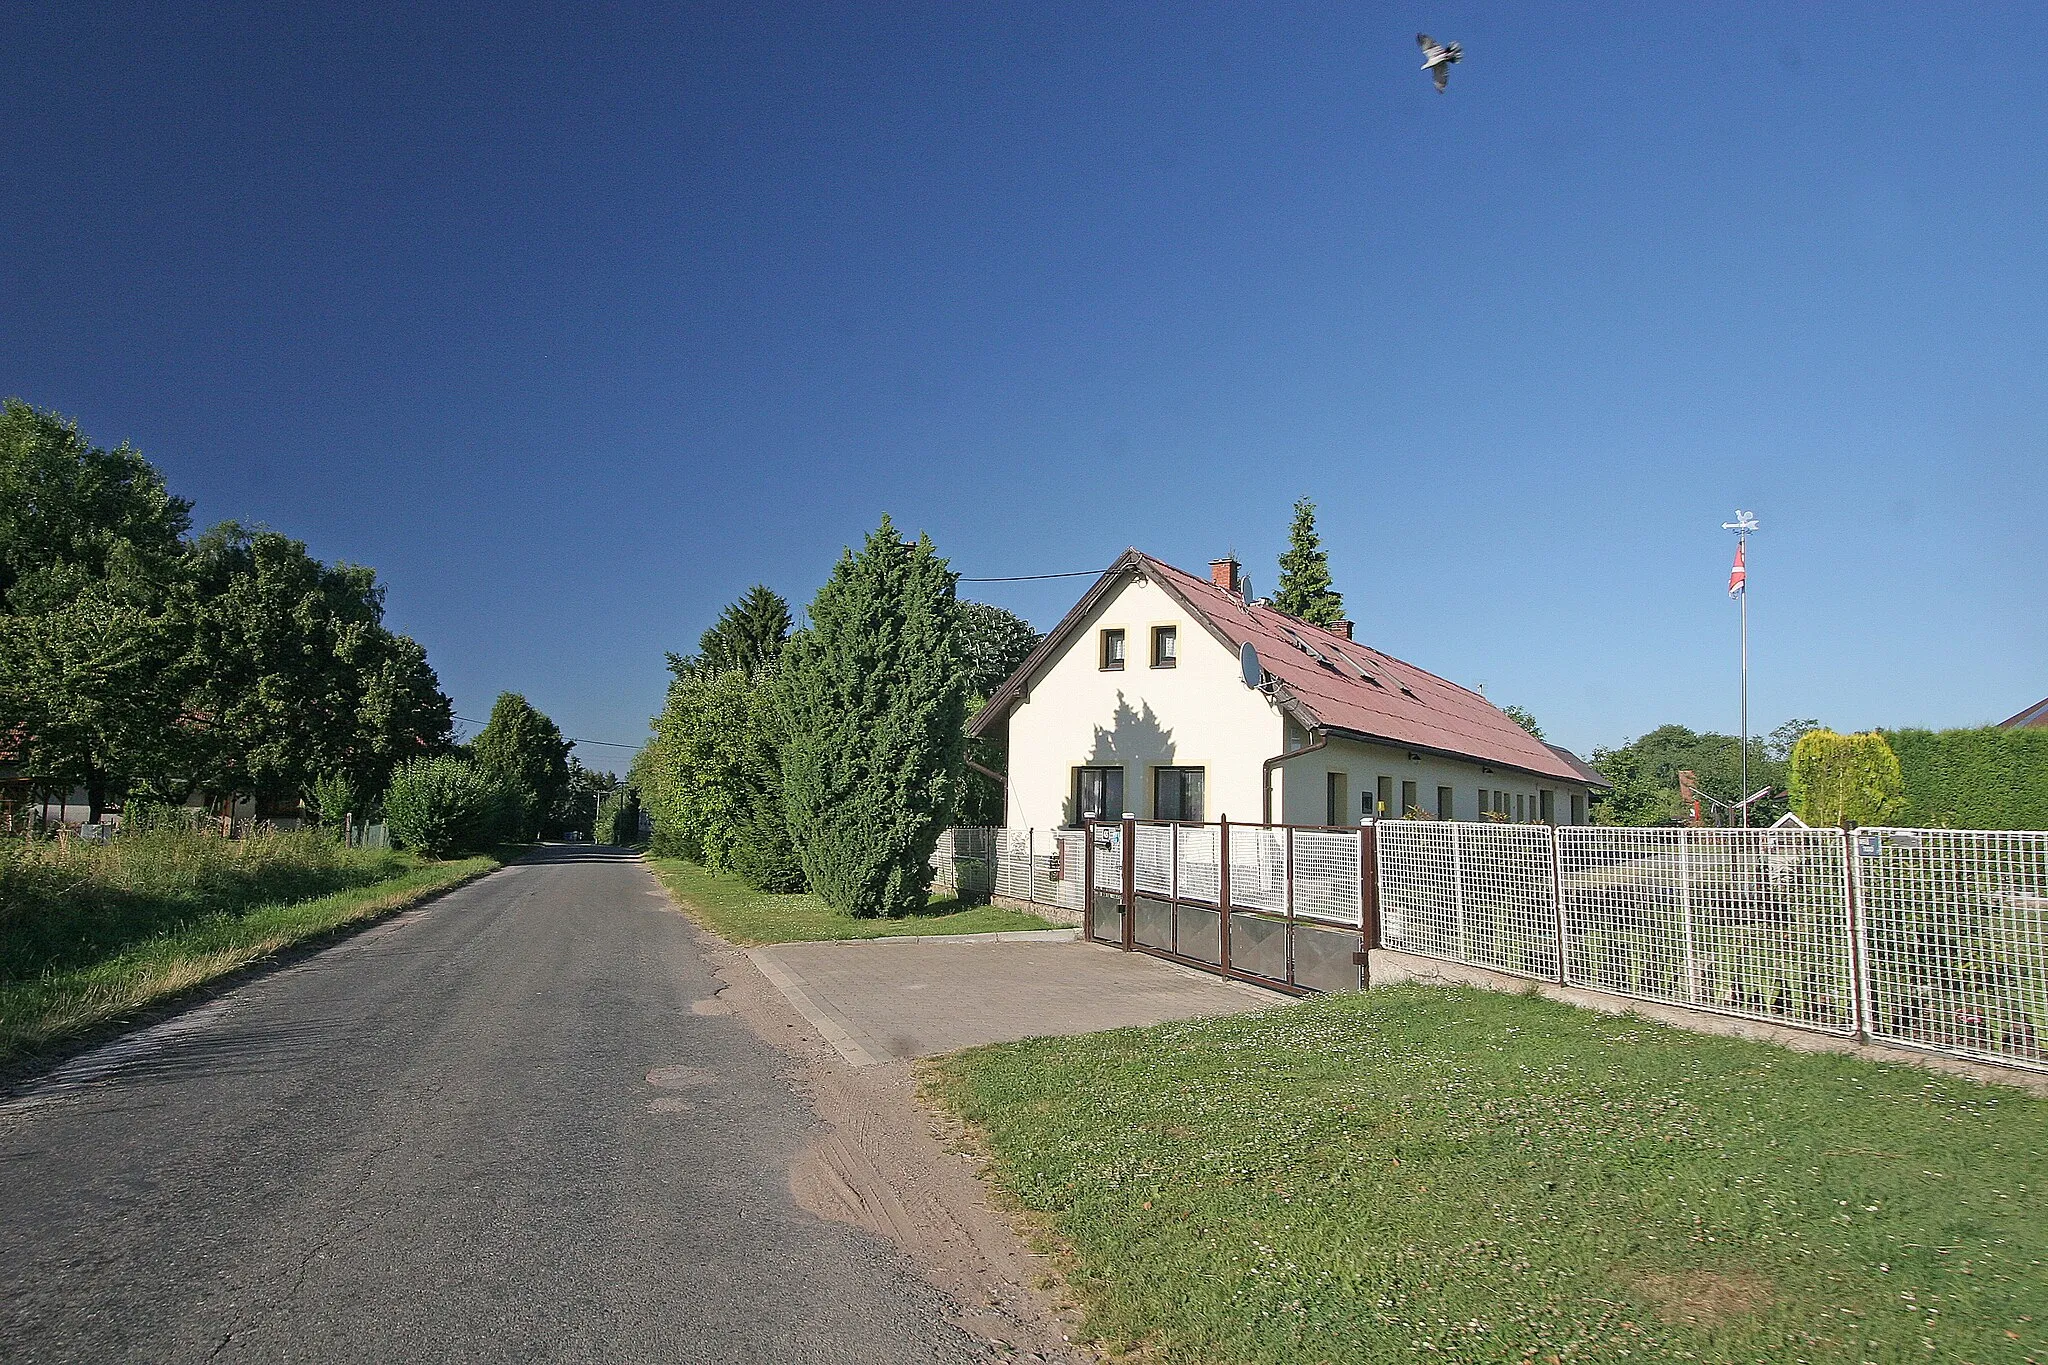 Photo showing: Křičov čp. 45
Camera location 50° 16′ 13.6″ N, 15° 27′ 51.08″ E View this and other nearby images on: OpenStreetMap 50.270444;   15.464189

This file was created as a part of the photographic program of Wikimedia Czech Republic. Project: Foto českých obcí The program supports Wikimedia Commons photographers in the Czech Republic.